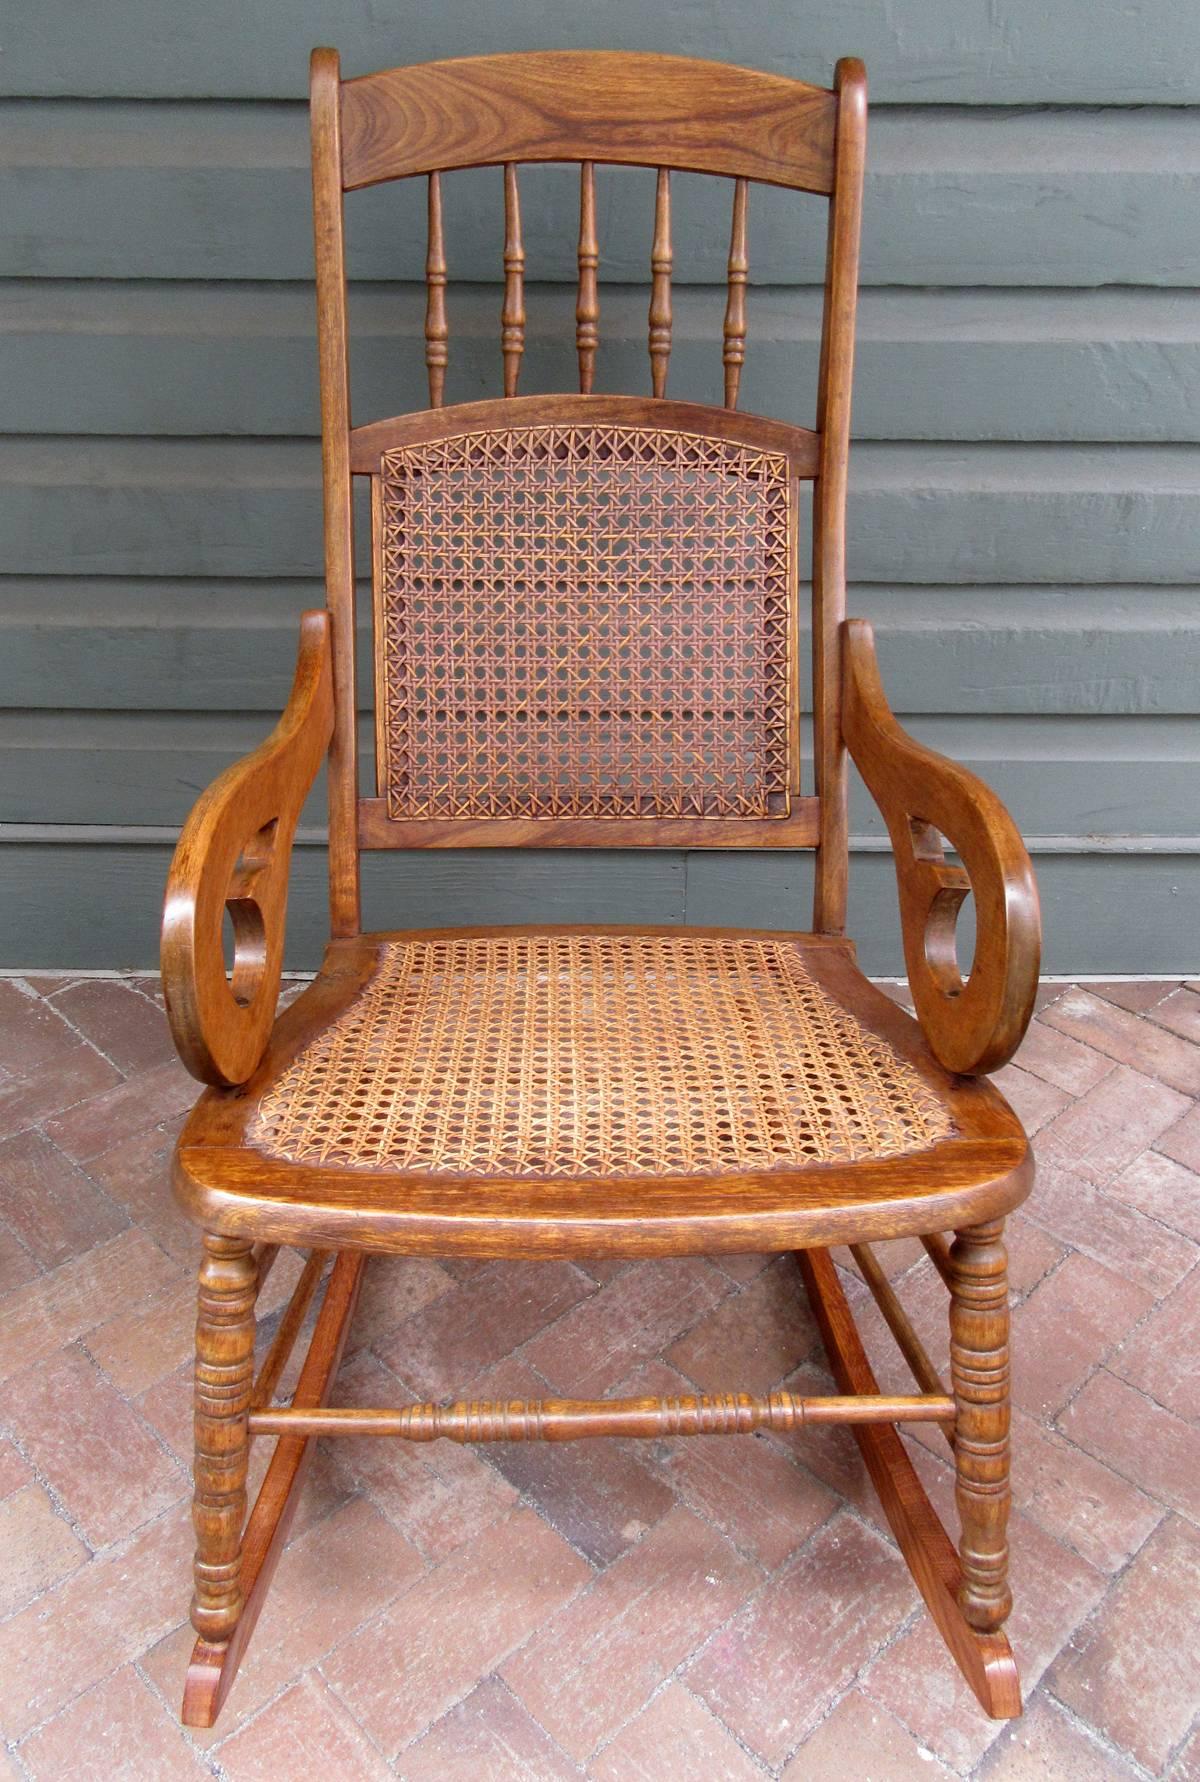 A Caribbean Regency mahogany and cane rocking chair from St. Croix, circa 1860, featuring scroll arms and handwoven caning. The mahogany is sun bleached and the runners were replaced with oak ones from being worn out from use. However, the rocking